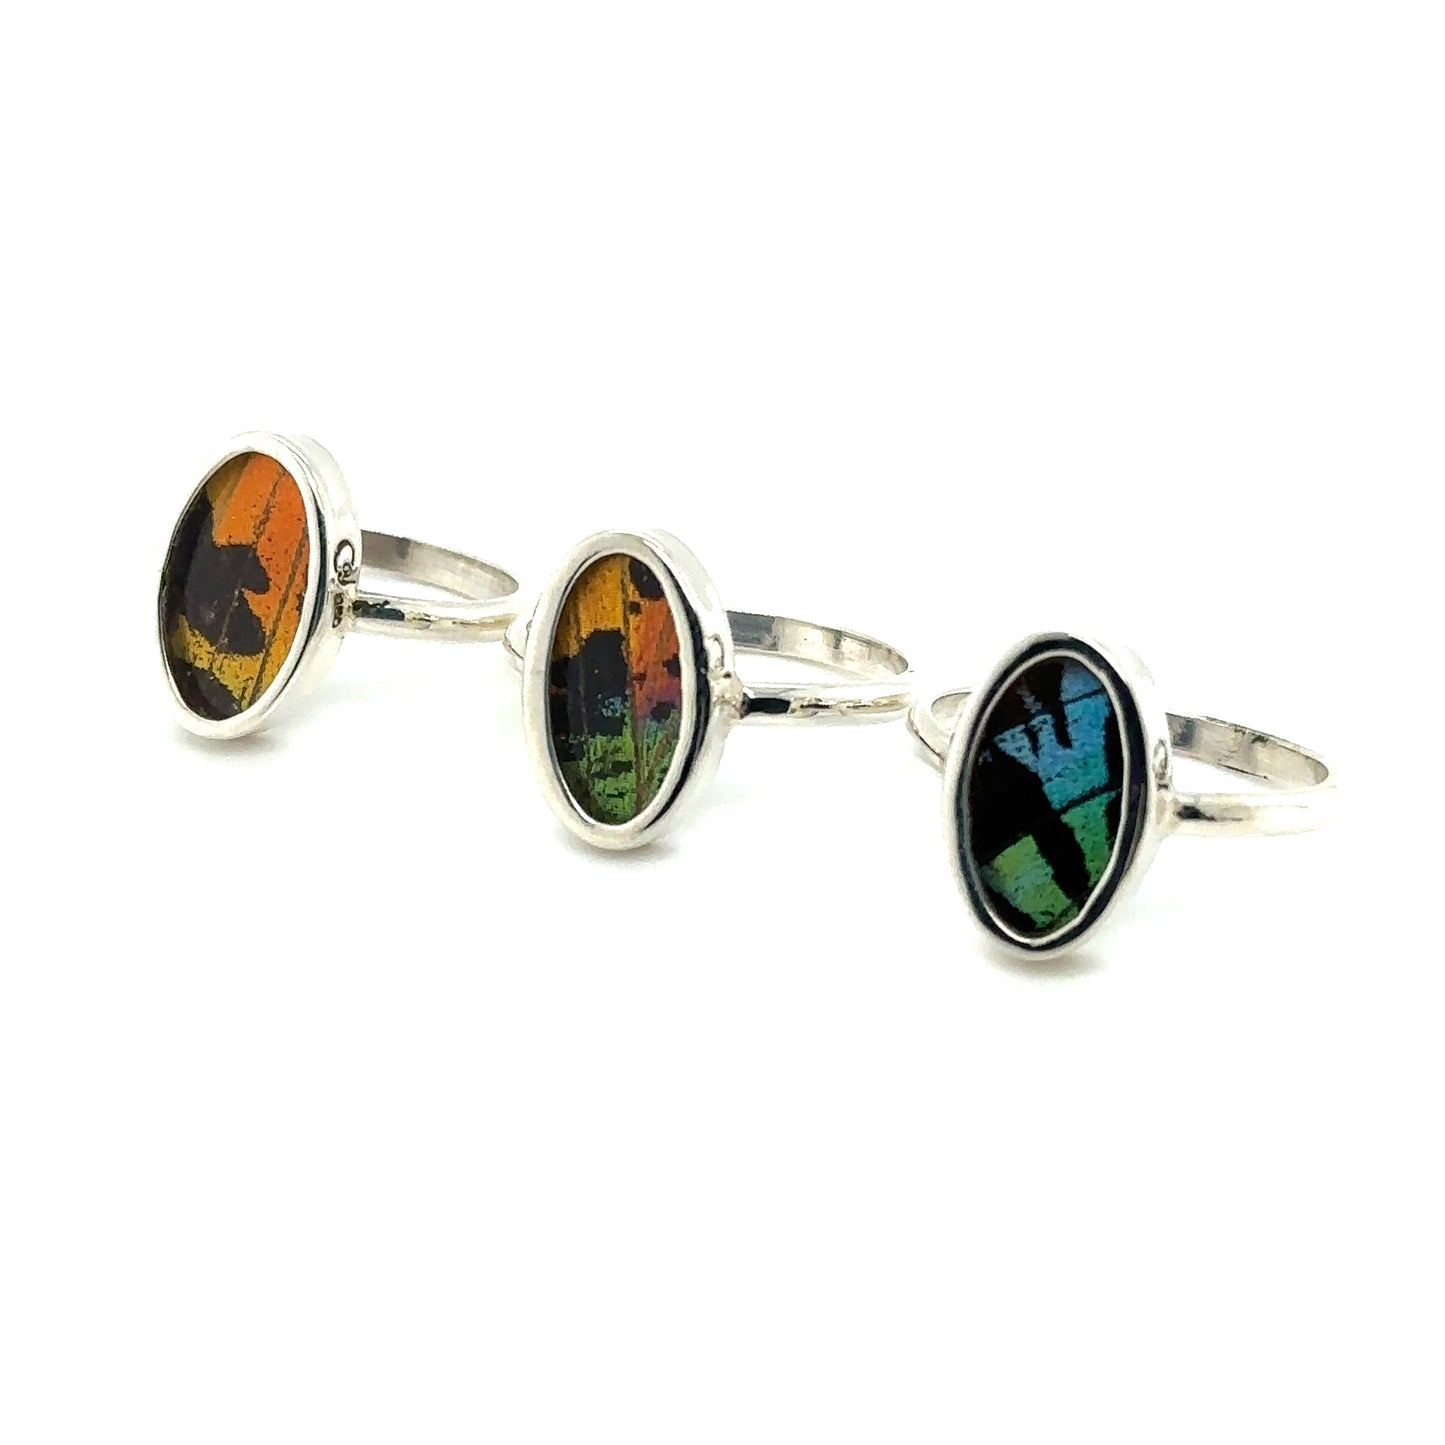 Three Genuine Butterfly Wing Rings in Oval Shape with multicolored glass.